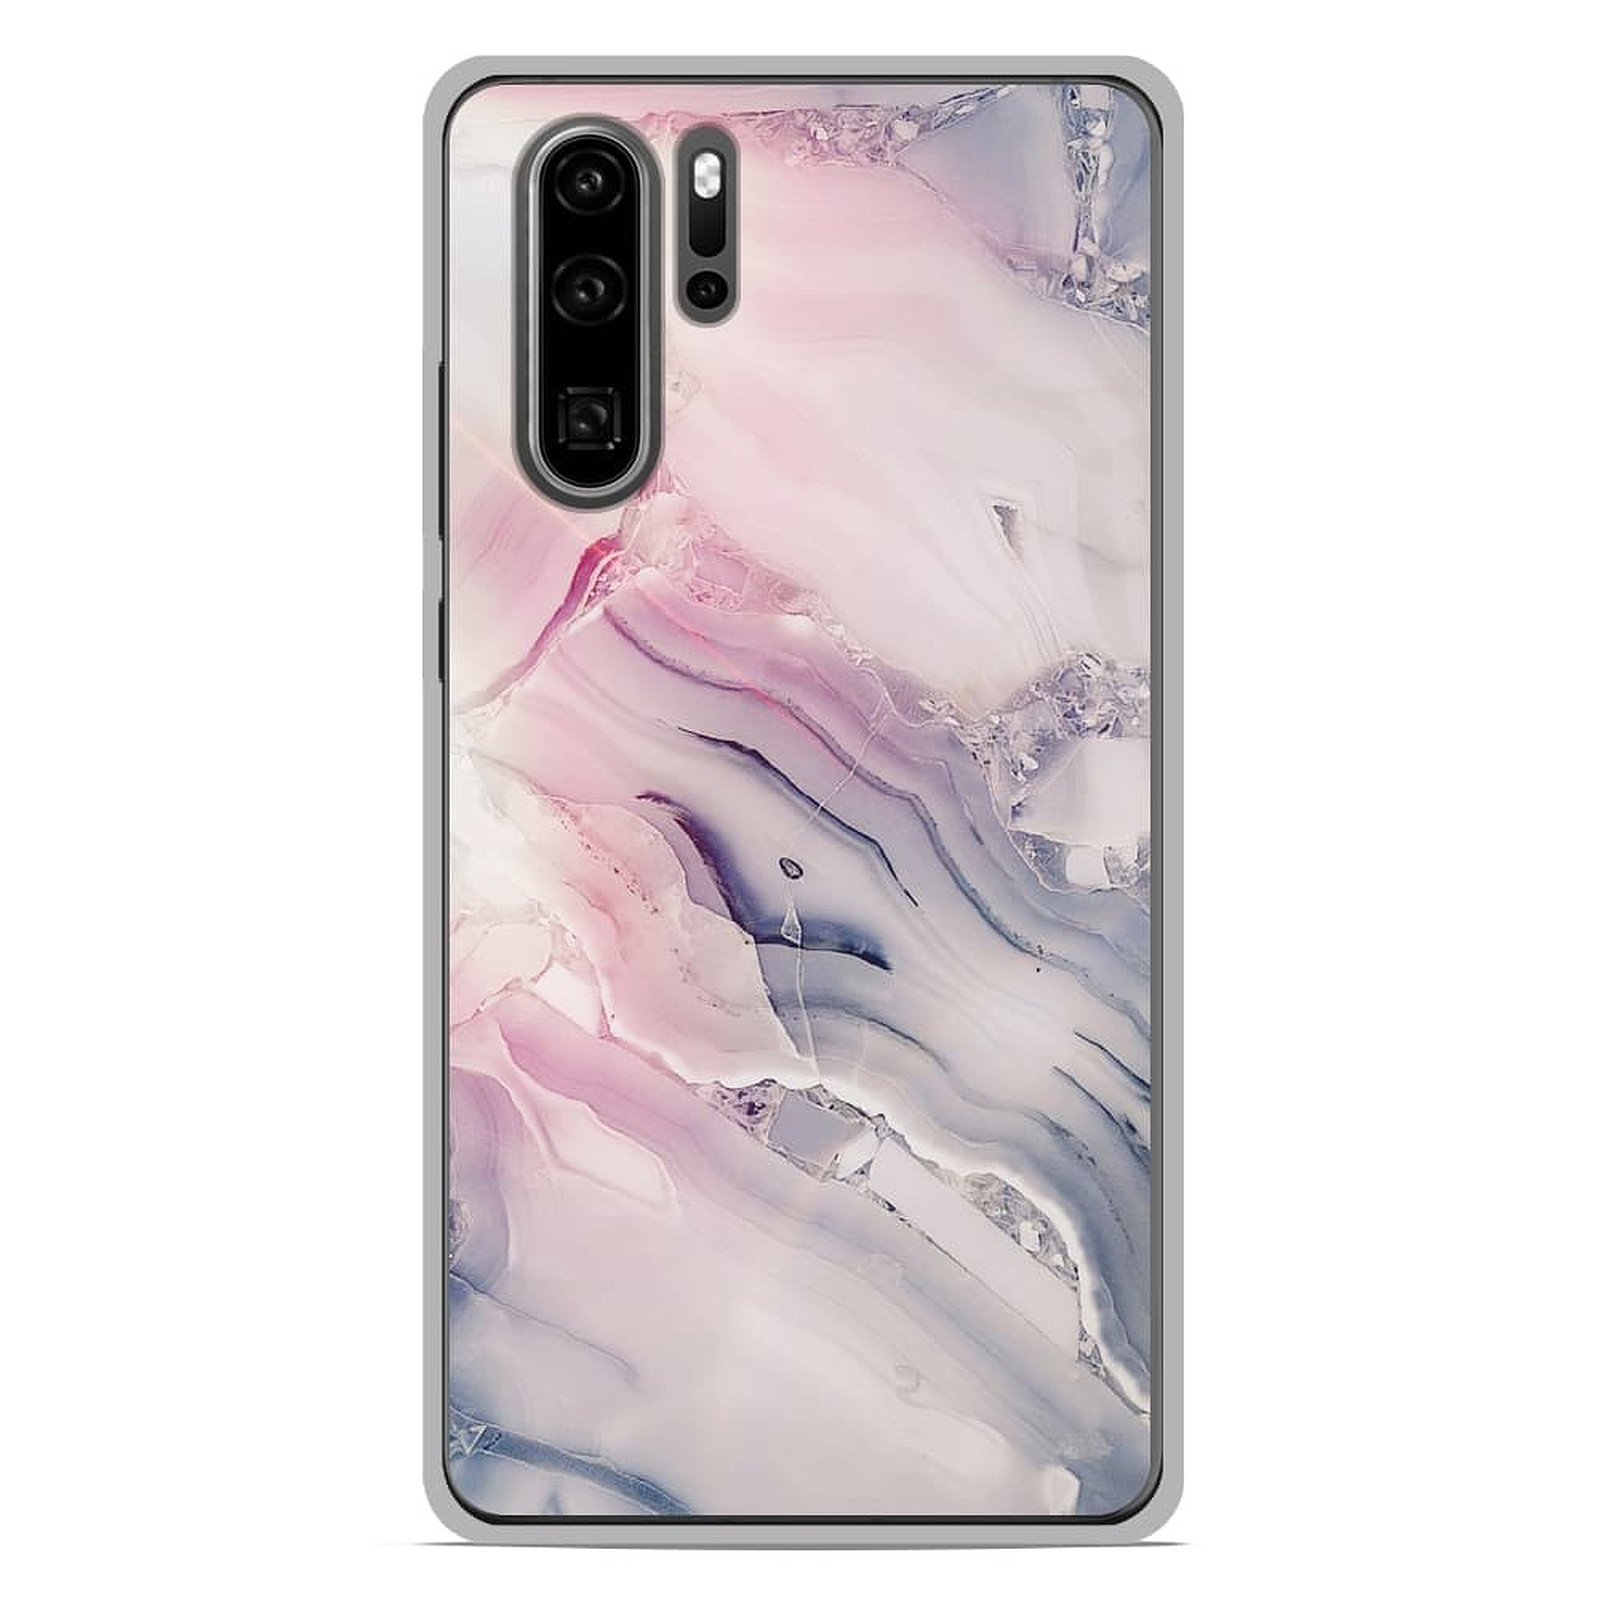 1001 Coques Coque silicone gel Huawei P30 Pro motif Zoom sur Pierre Claire - Coque telephone 1001Coques